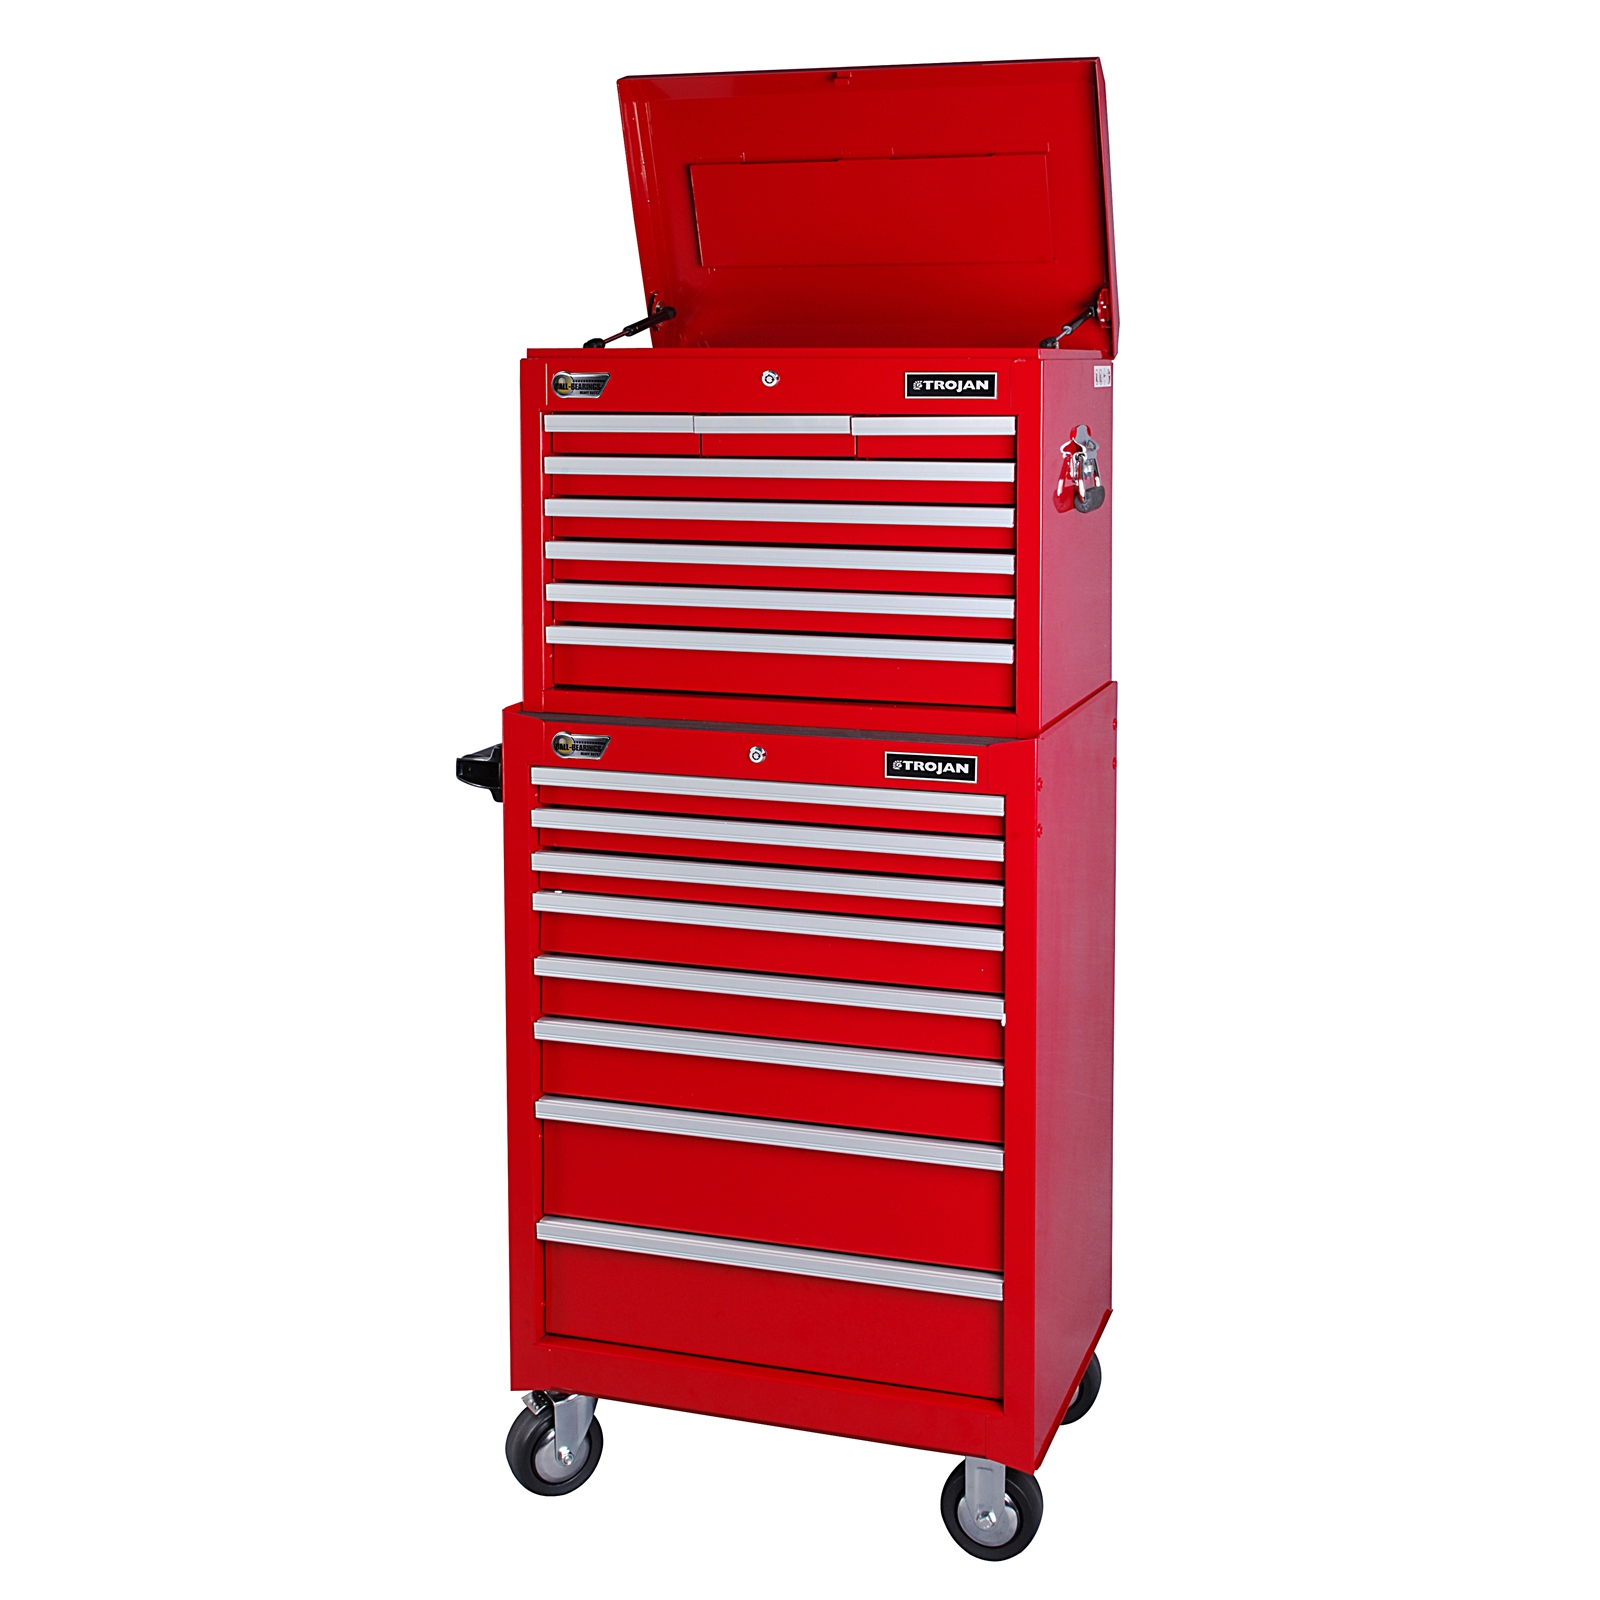 Trojan 680 x 460 x 1520mm 16 Drawer Tool Chest And Trolley at Bunnings